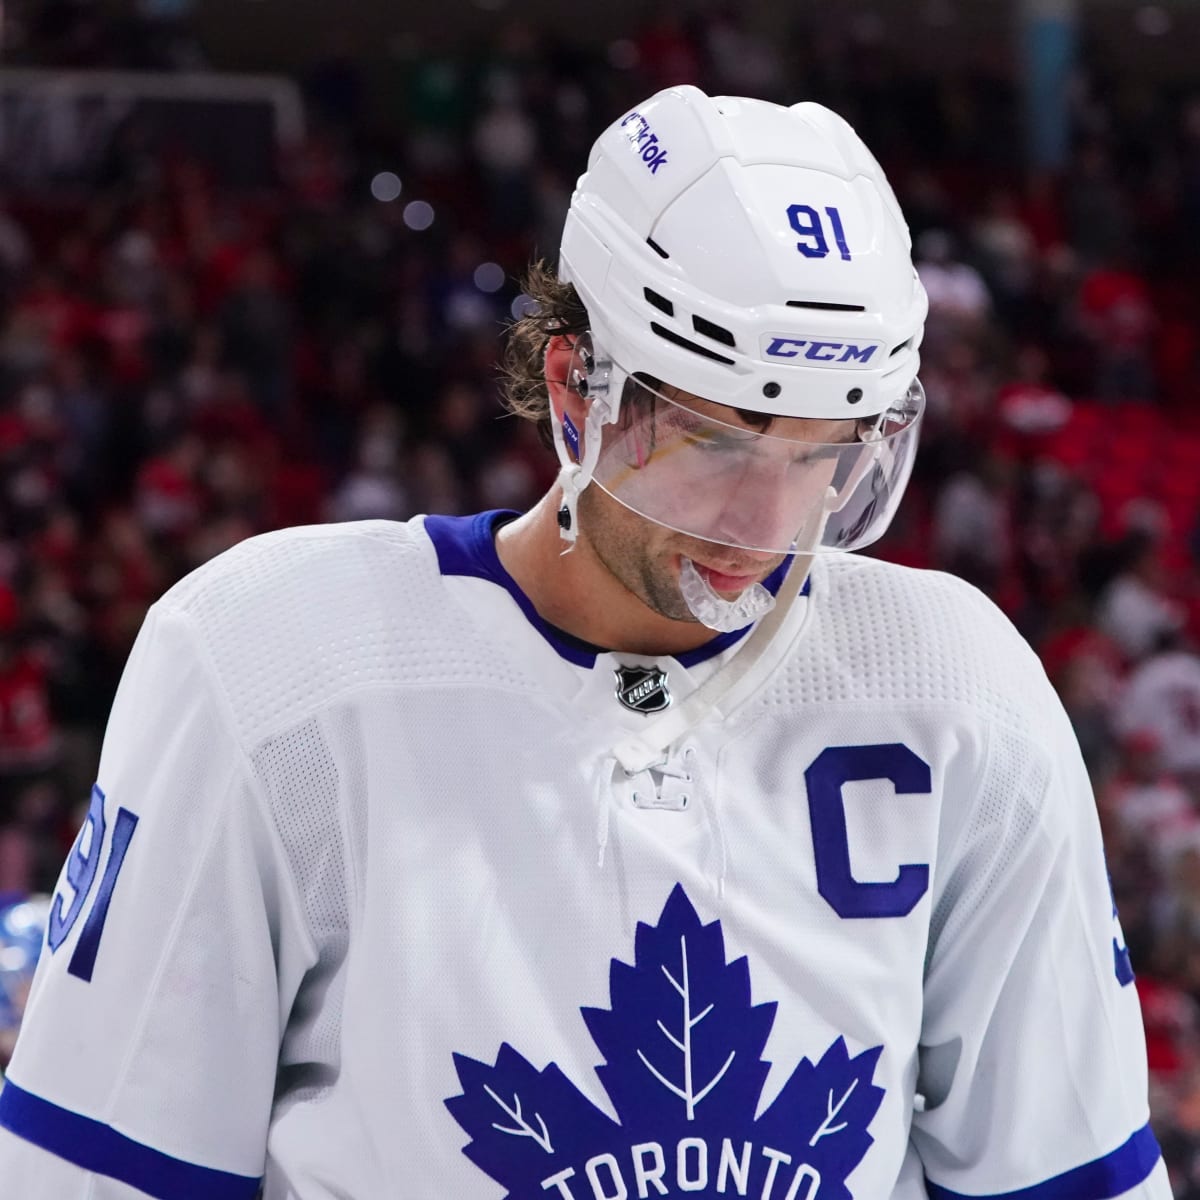 Toronto Maple Leafs at Chicago Blackhawks Live Stream Watch Online, TV Channel, Start Time - How to Watch and Stream Major League and College Sports 